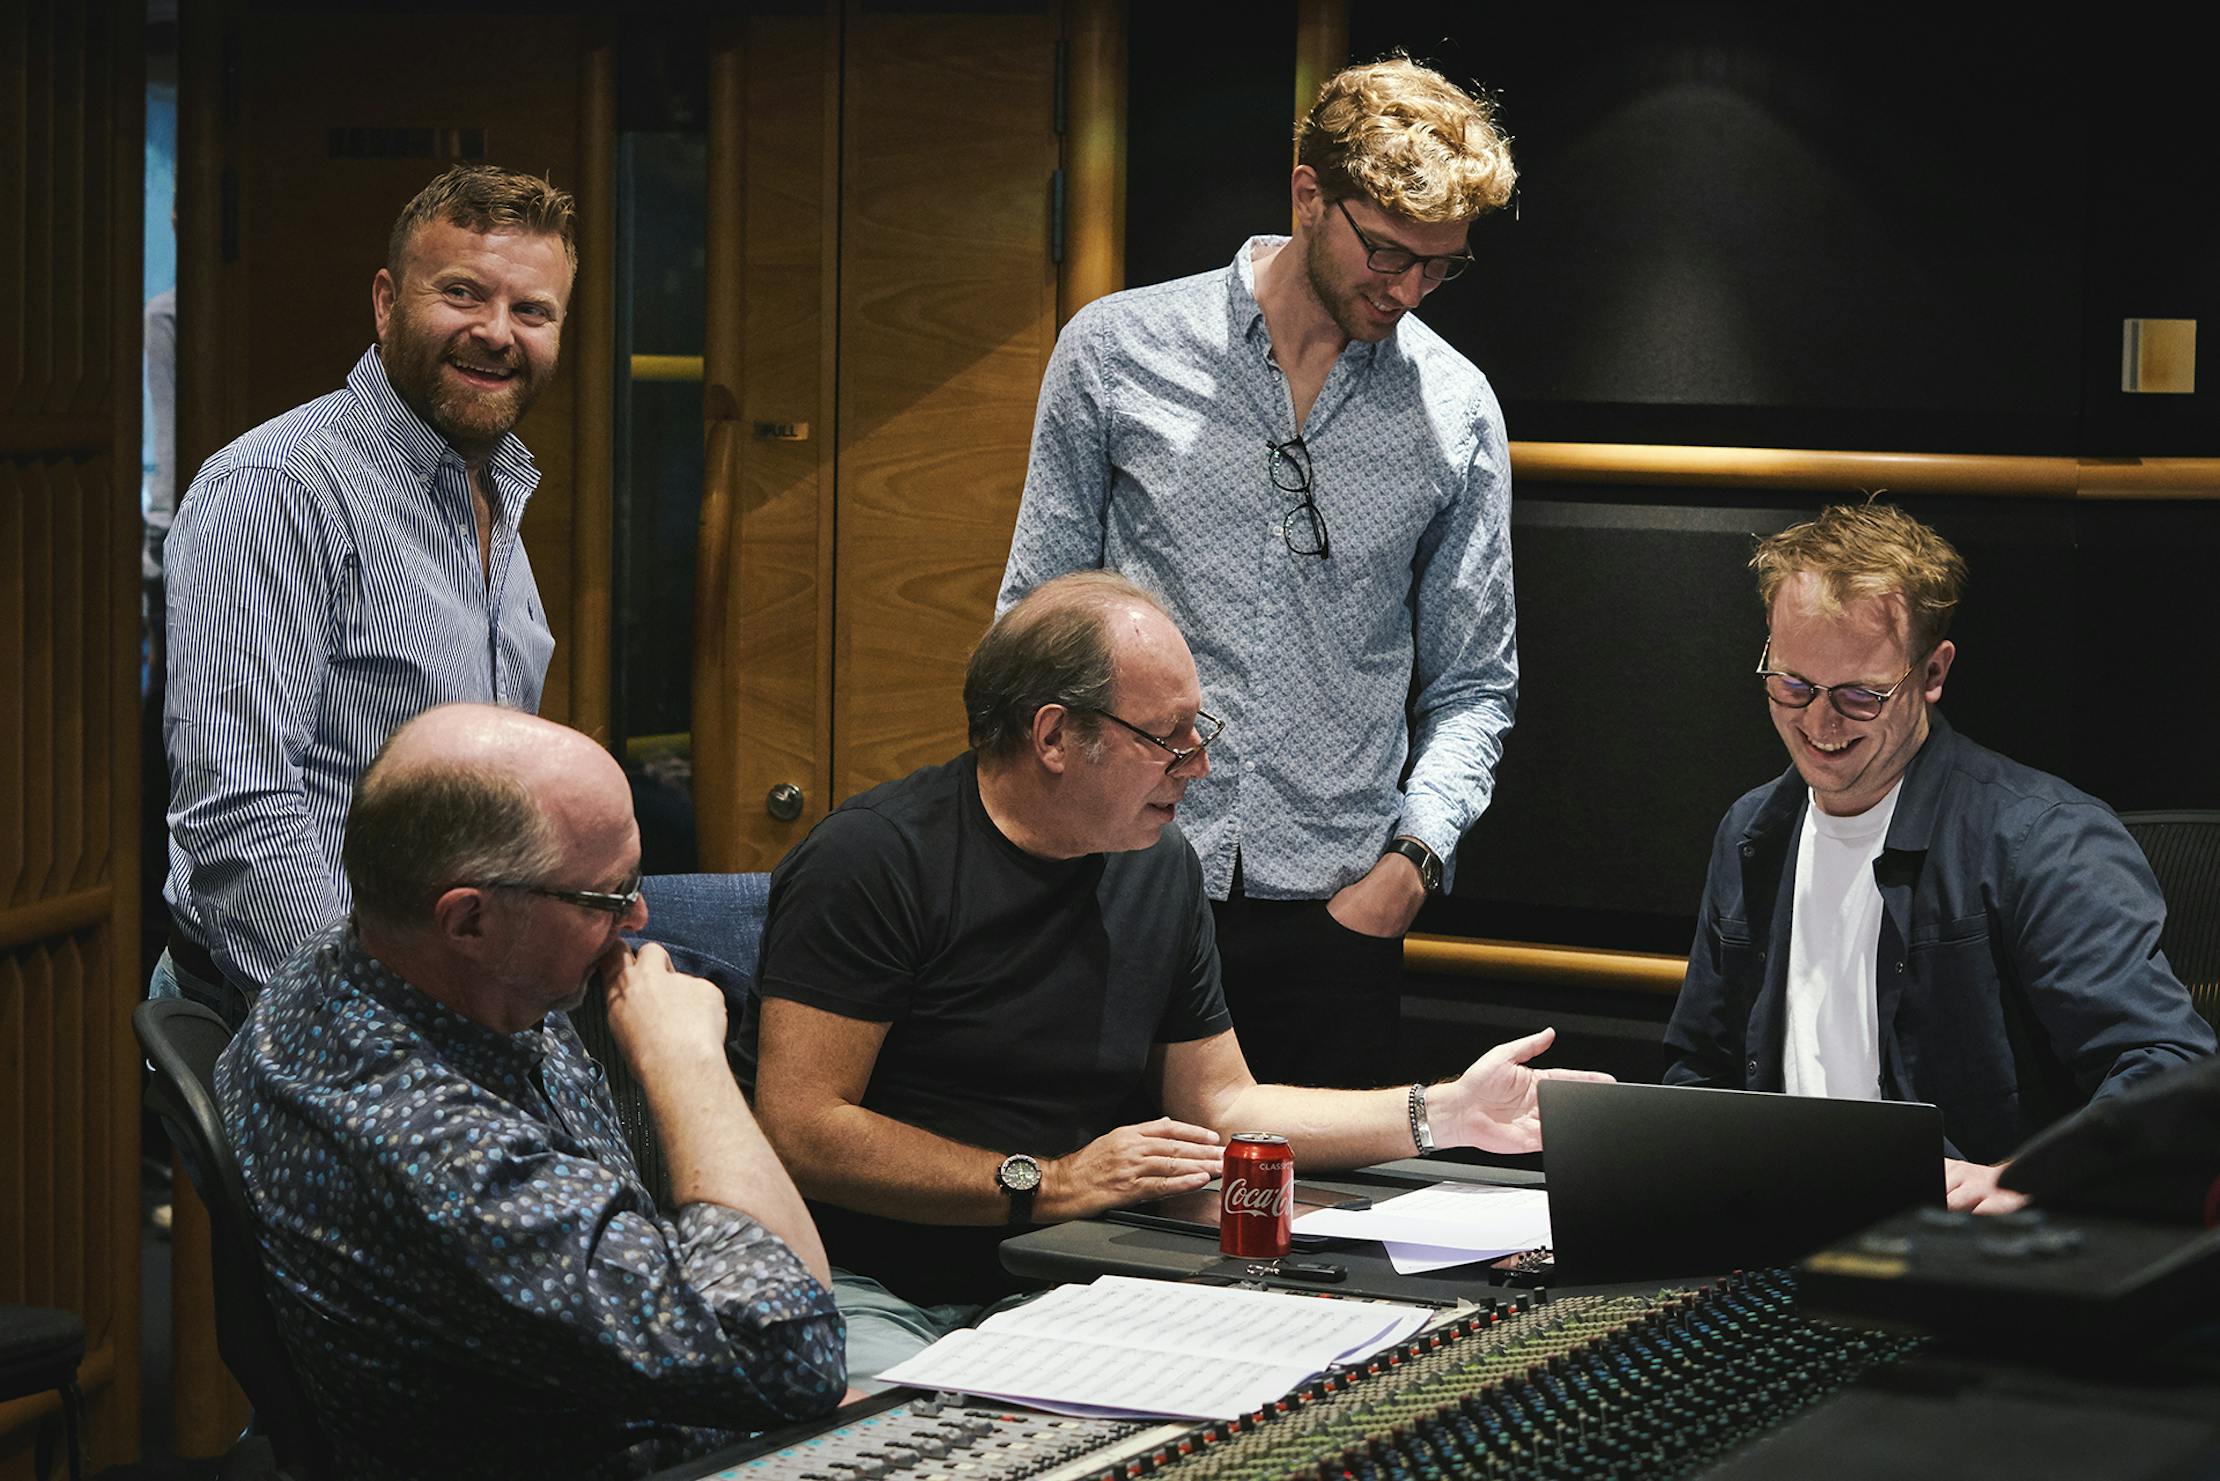 Hans Zimmer: The World of Hans Zimmer - Pure Audio Recordings